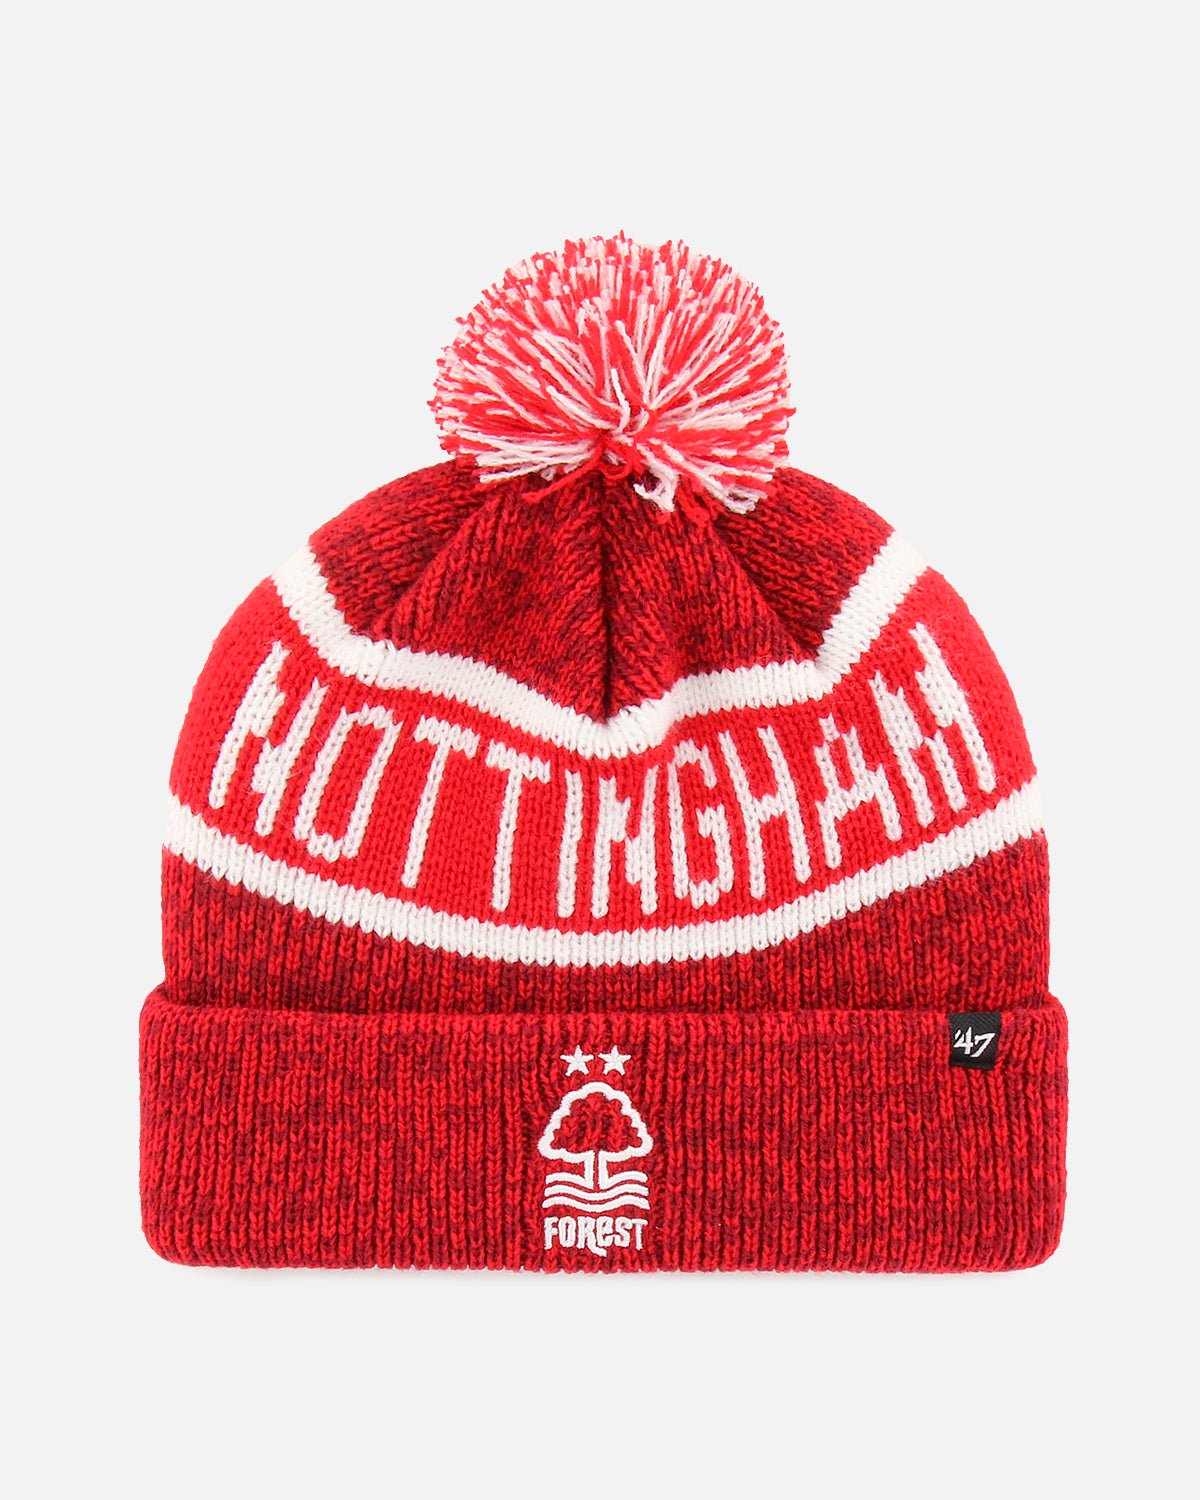 NFFC Red Tadpole '47 Cuff Knit - Junior - Nottingham Forest FC